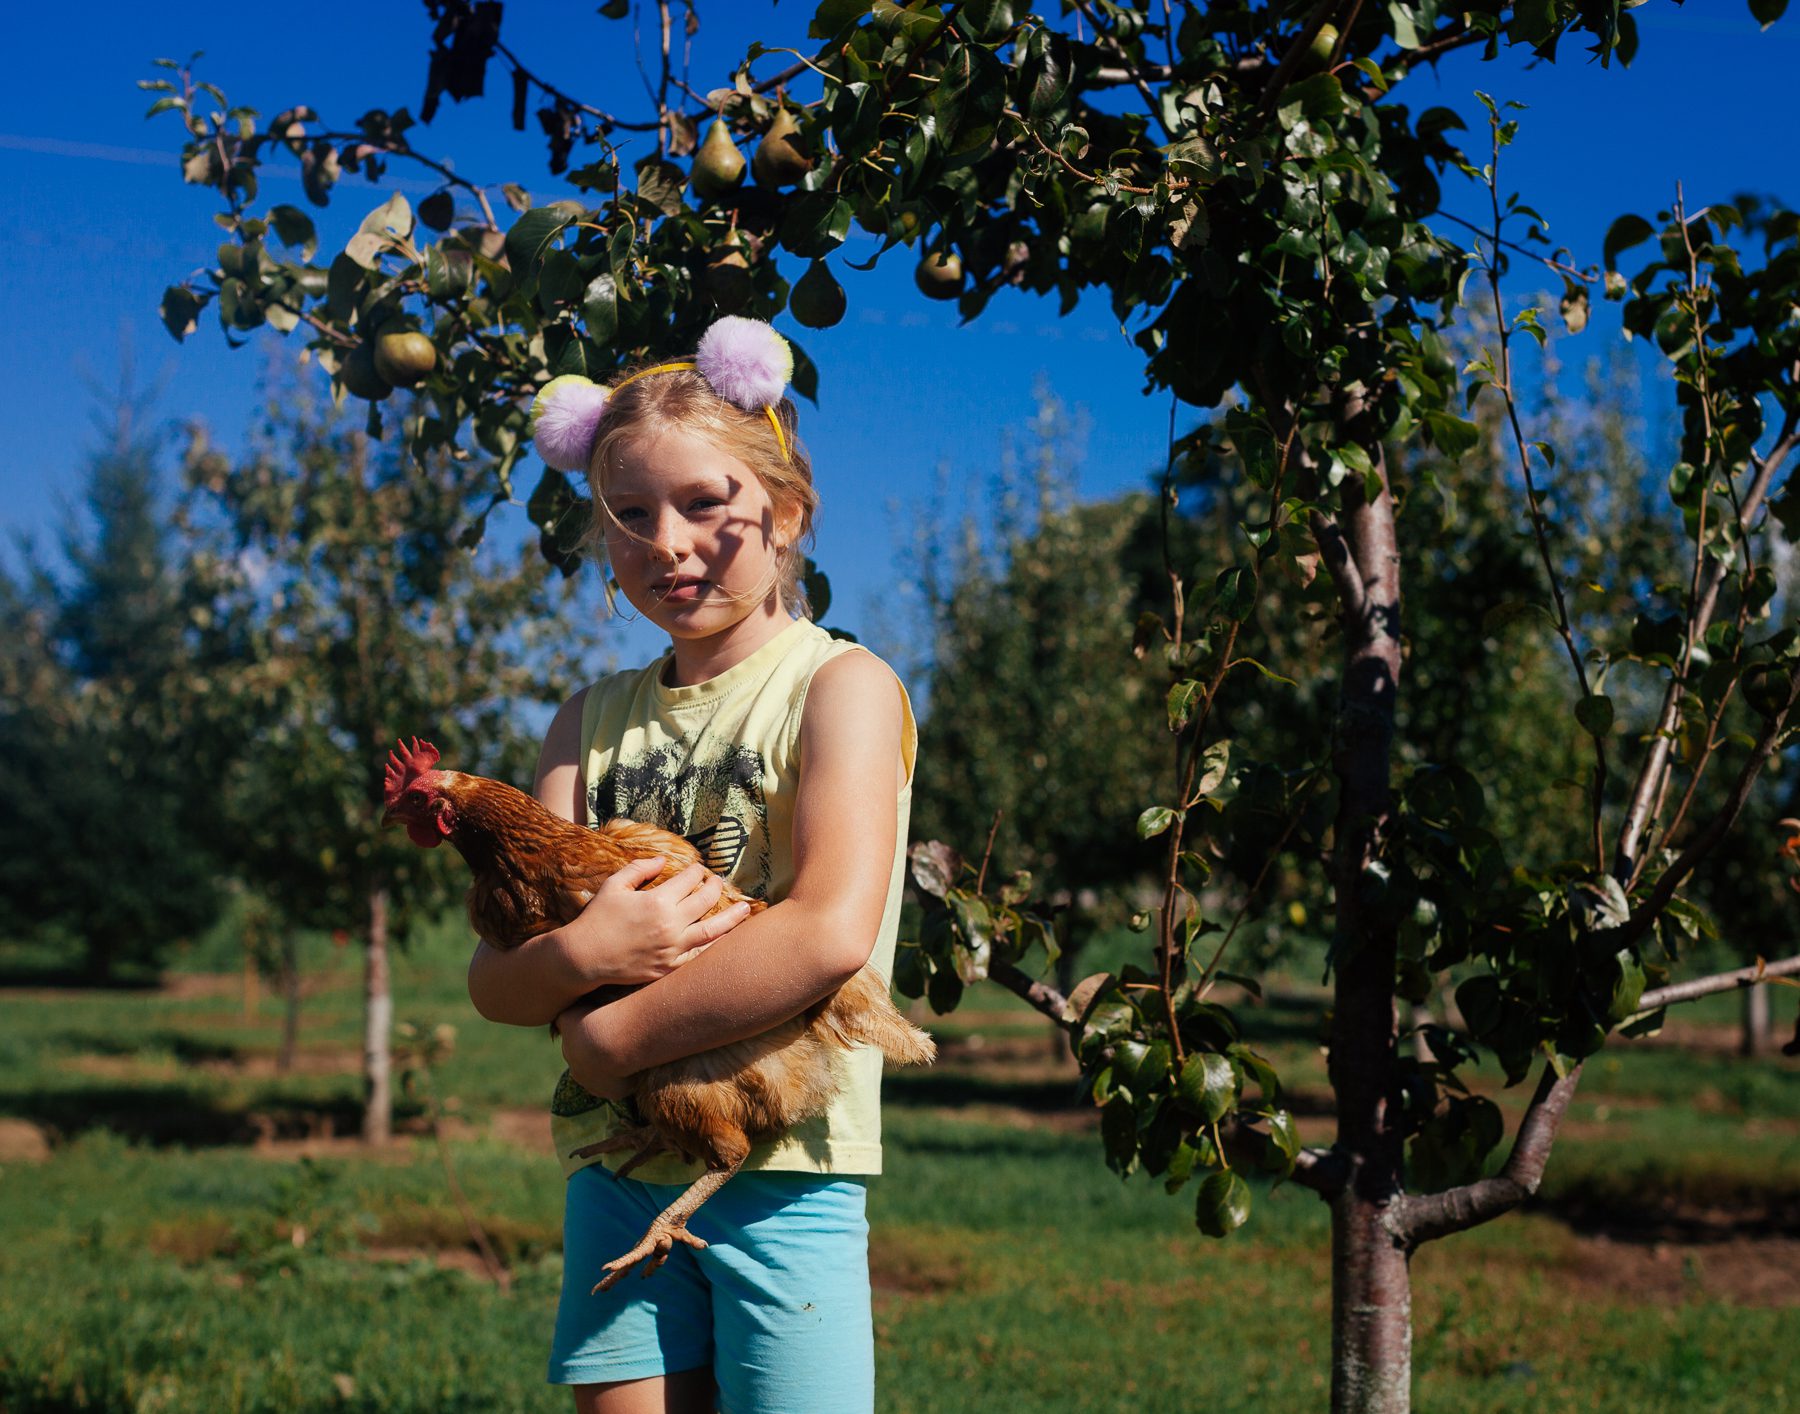 Scarlet, age seven, started a business collecting and selling the eggs from her 25 chickens.